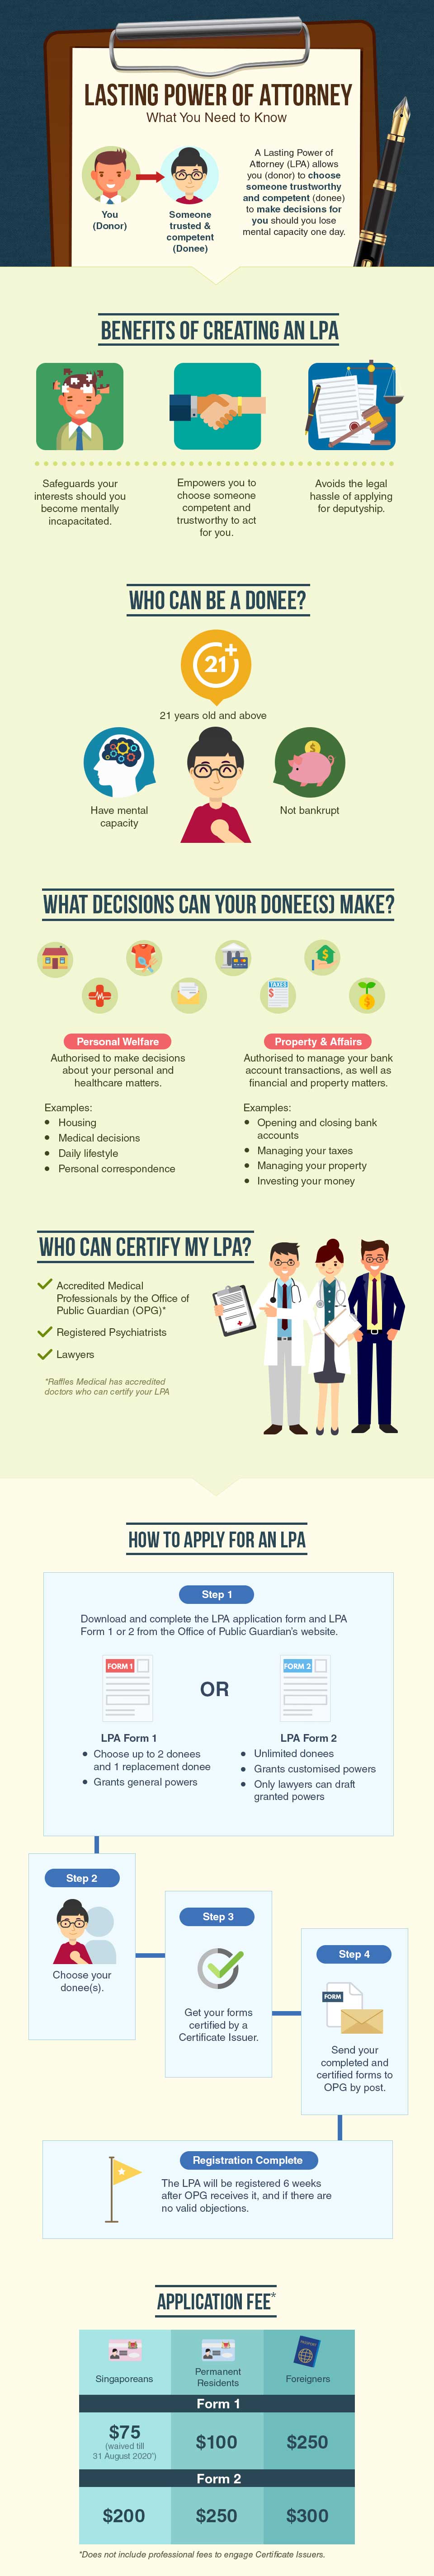 lasting power of attorney infographic